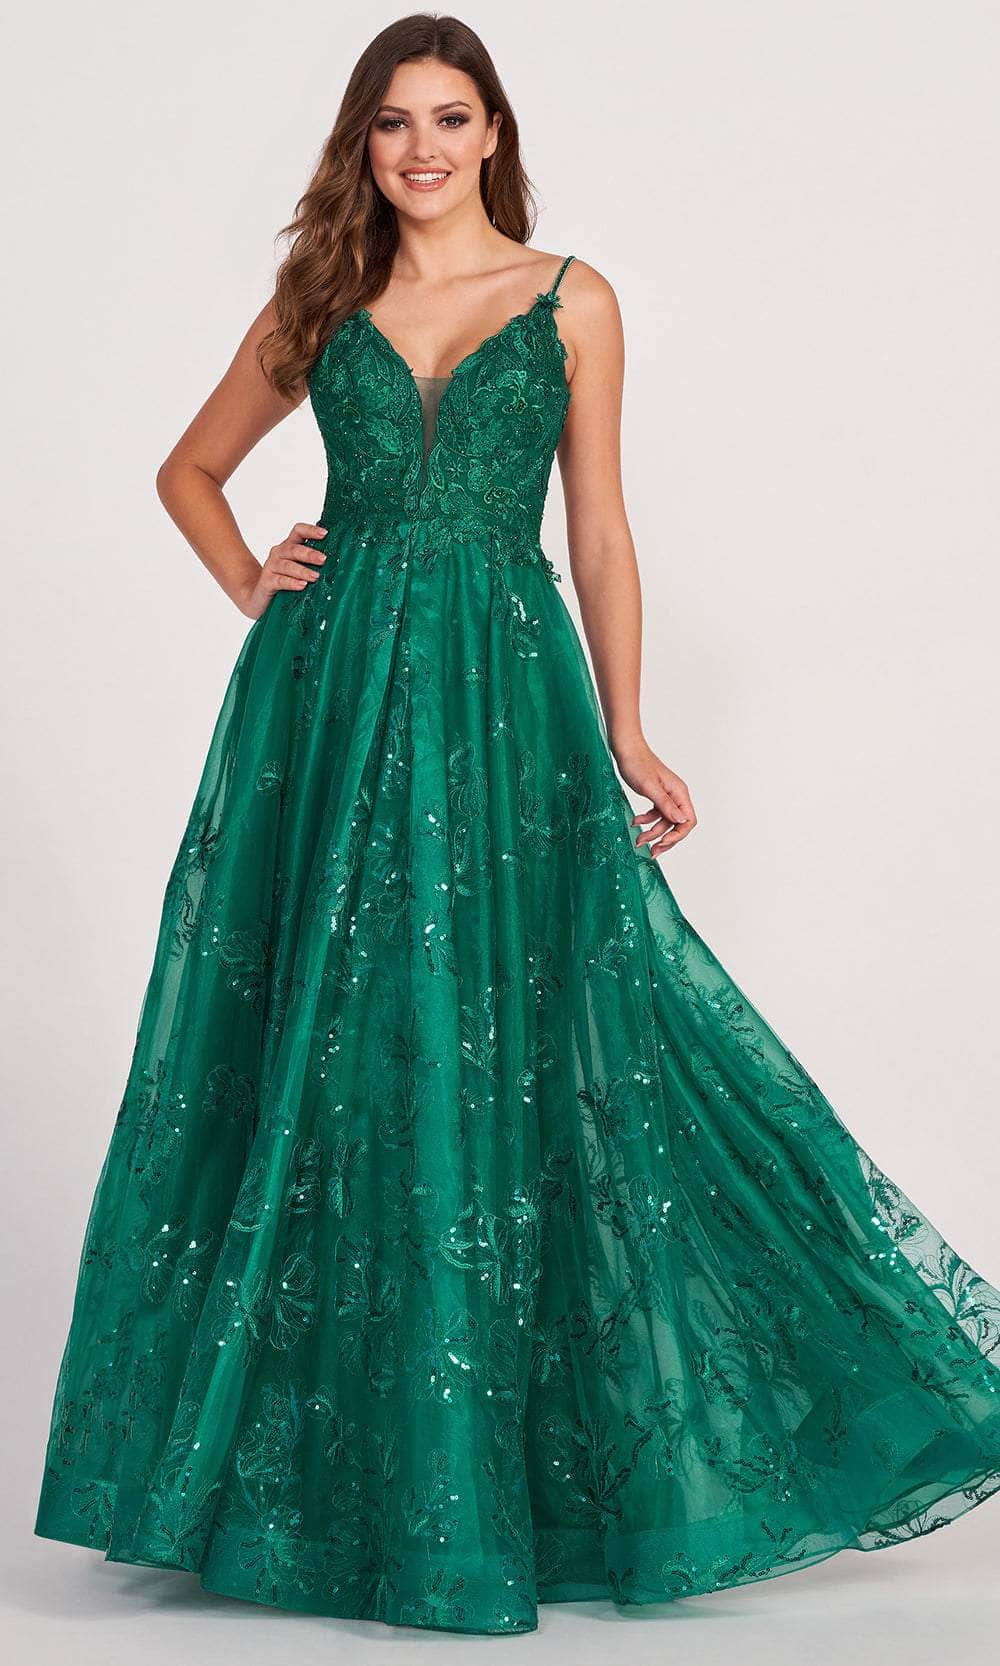 Image of Ellie Wilde EW34051 - Embroidered Lace A-Line Prom Dress